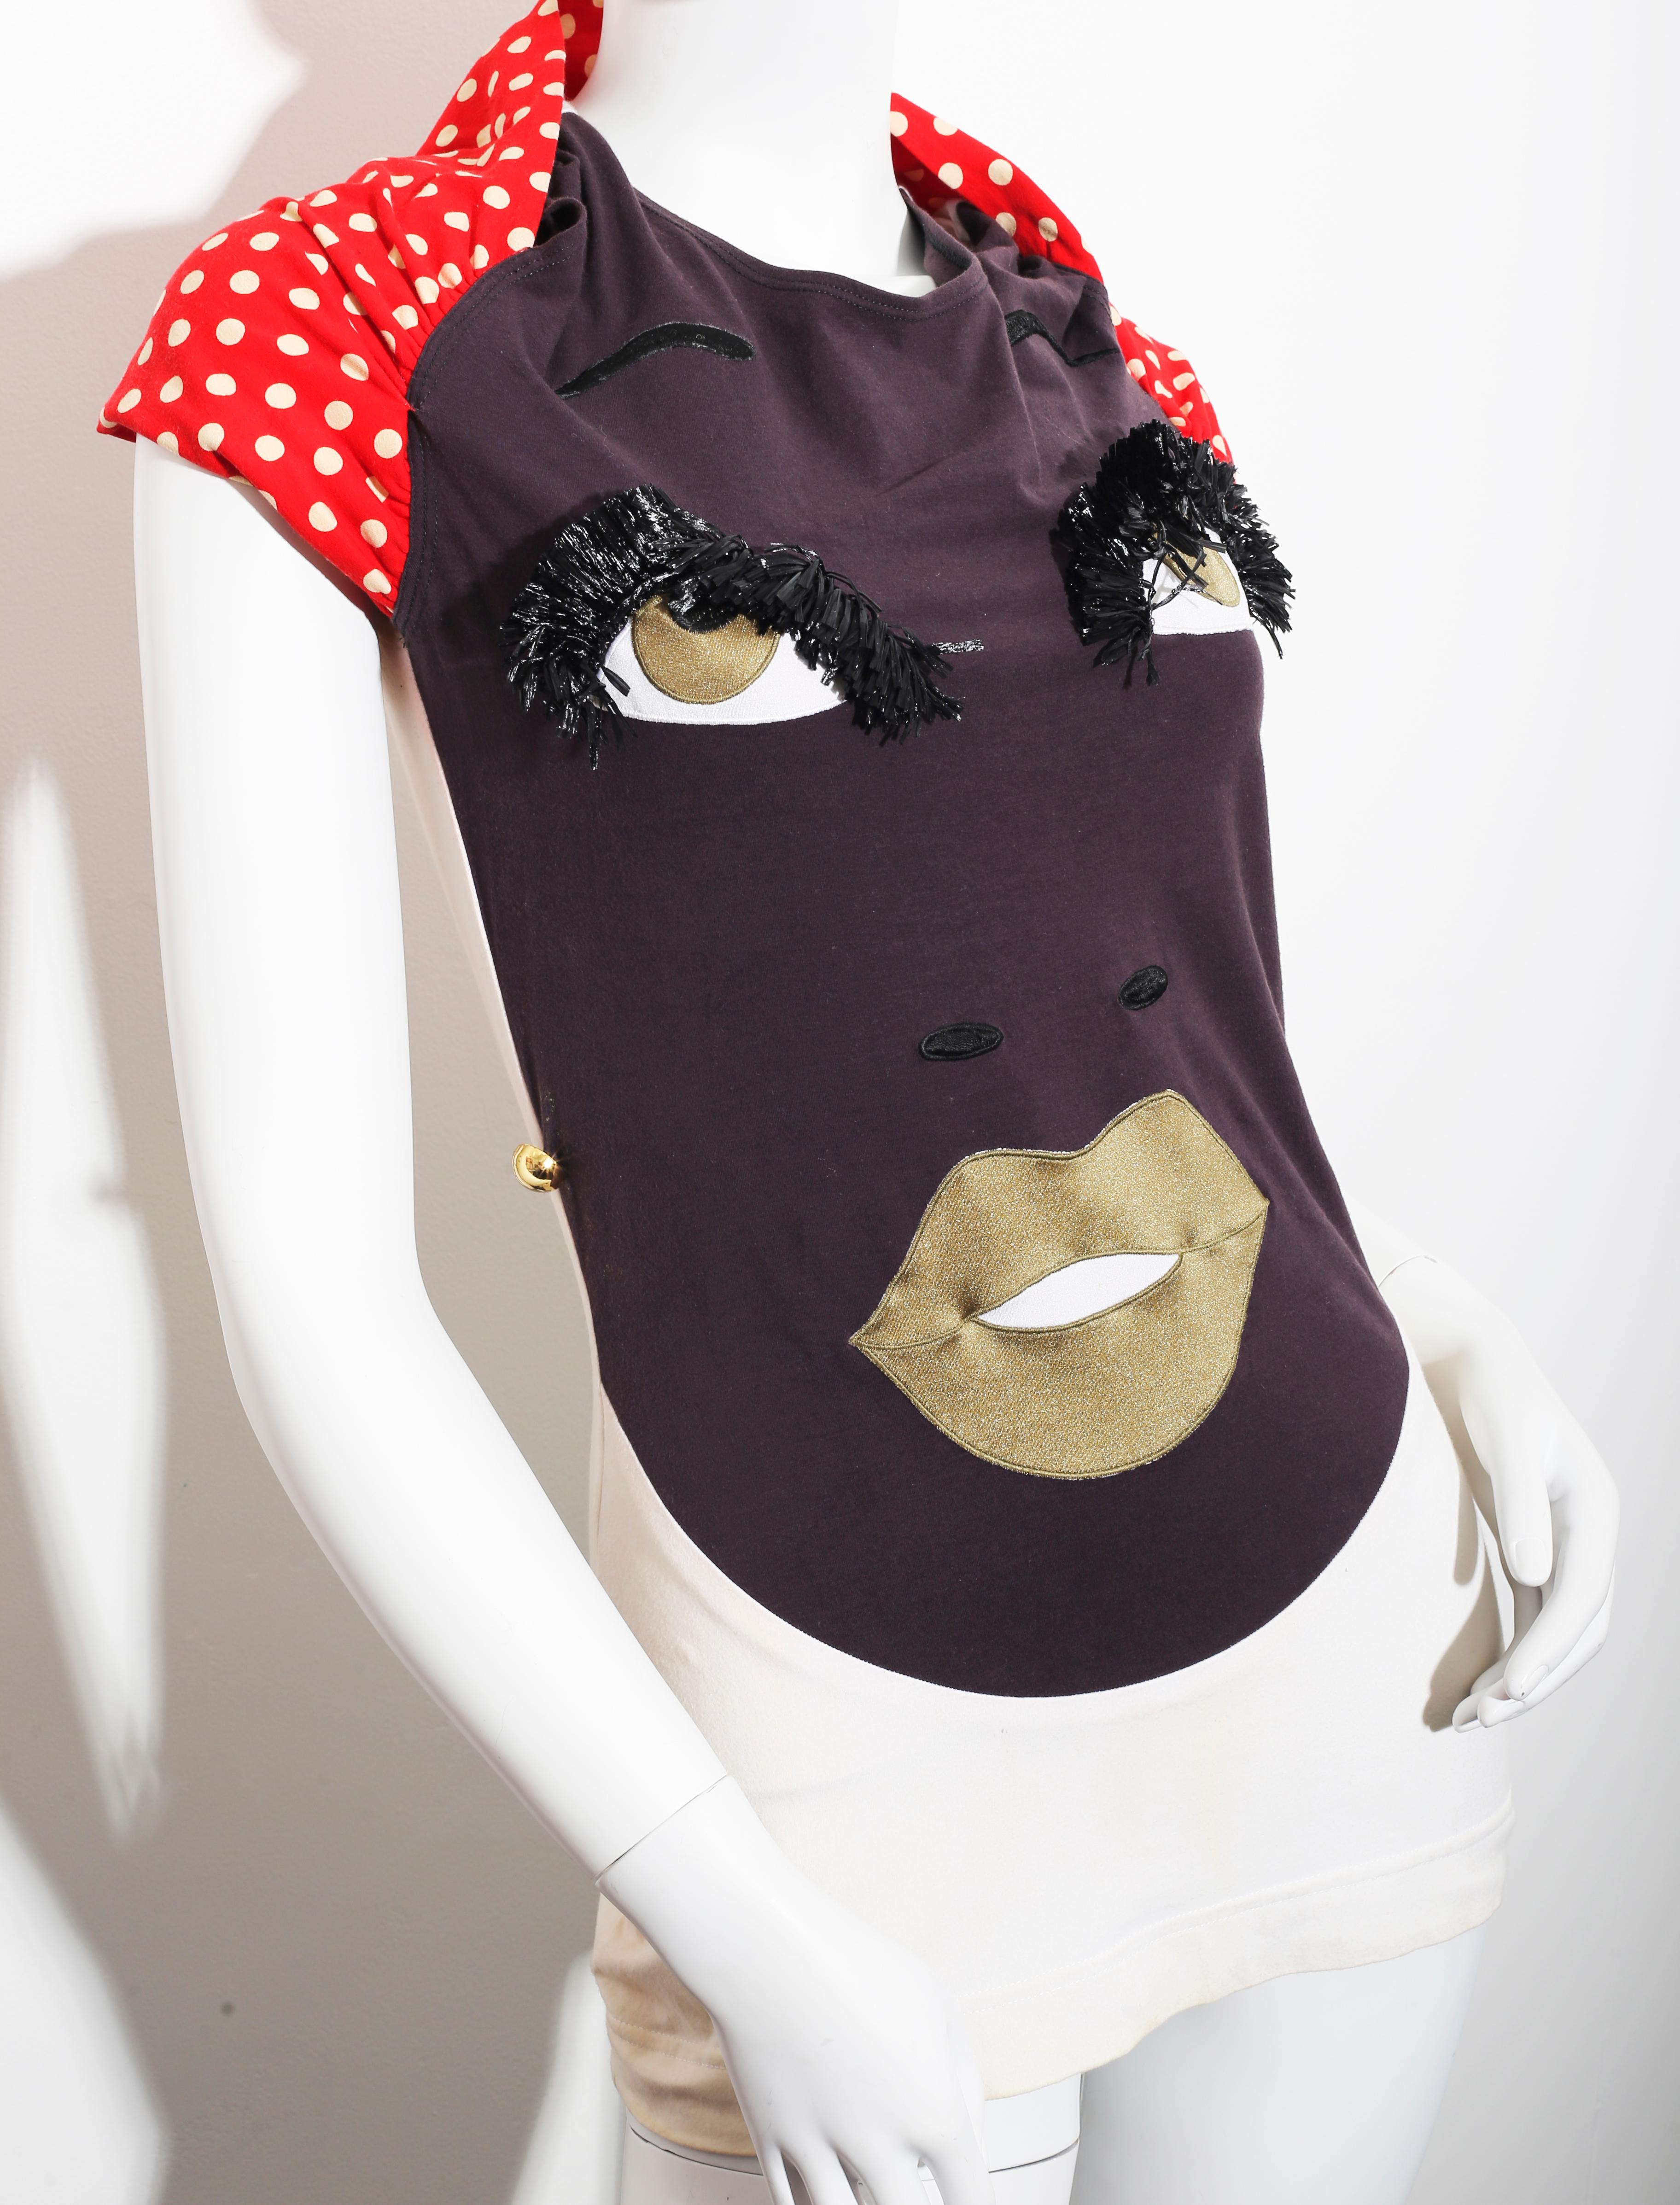  Vintage 1990´s Moschino Polkadots sexy eyes and mouth face shirt 
Made in Italy
Marked Size Italy 42 US 8 can fit smaller sizes too since textile is  stretch
Length 52cm, inches 20,47 
Moschino  brand was originally created in 1983 by the late